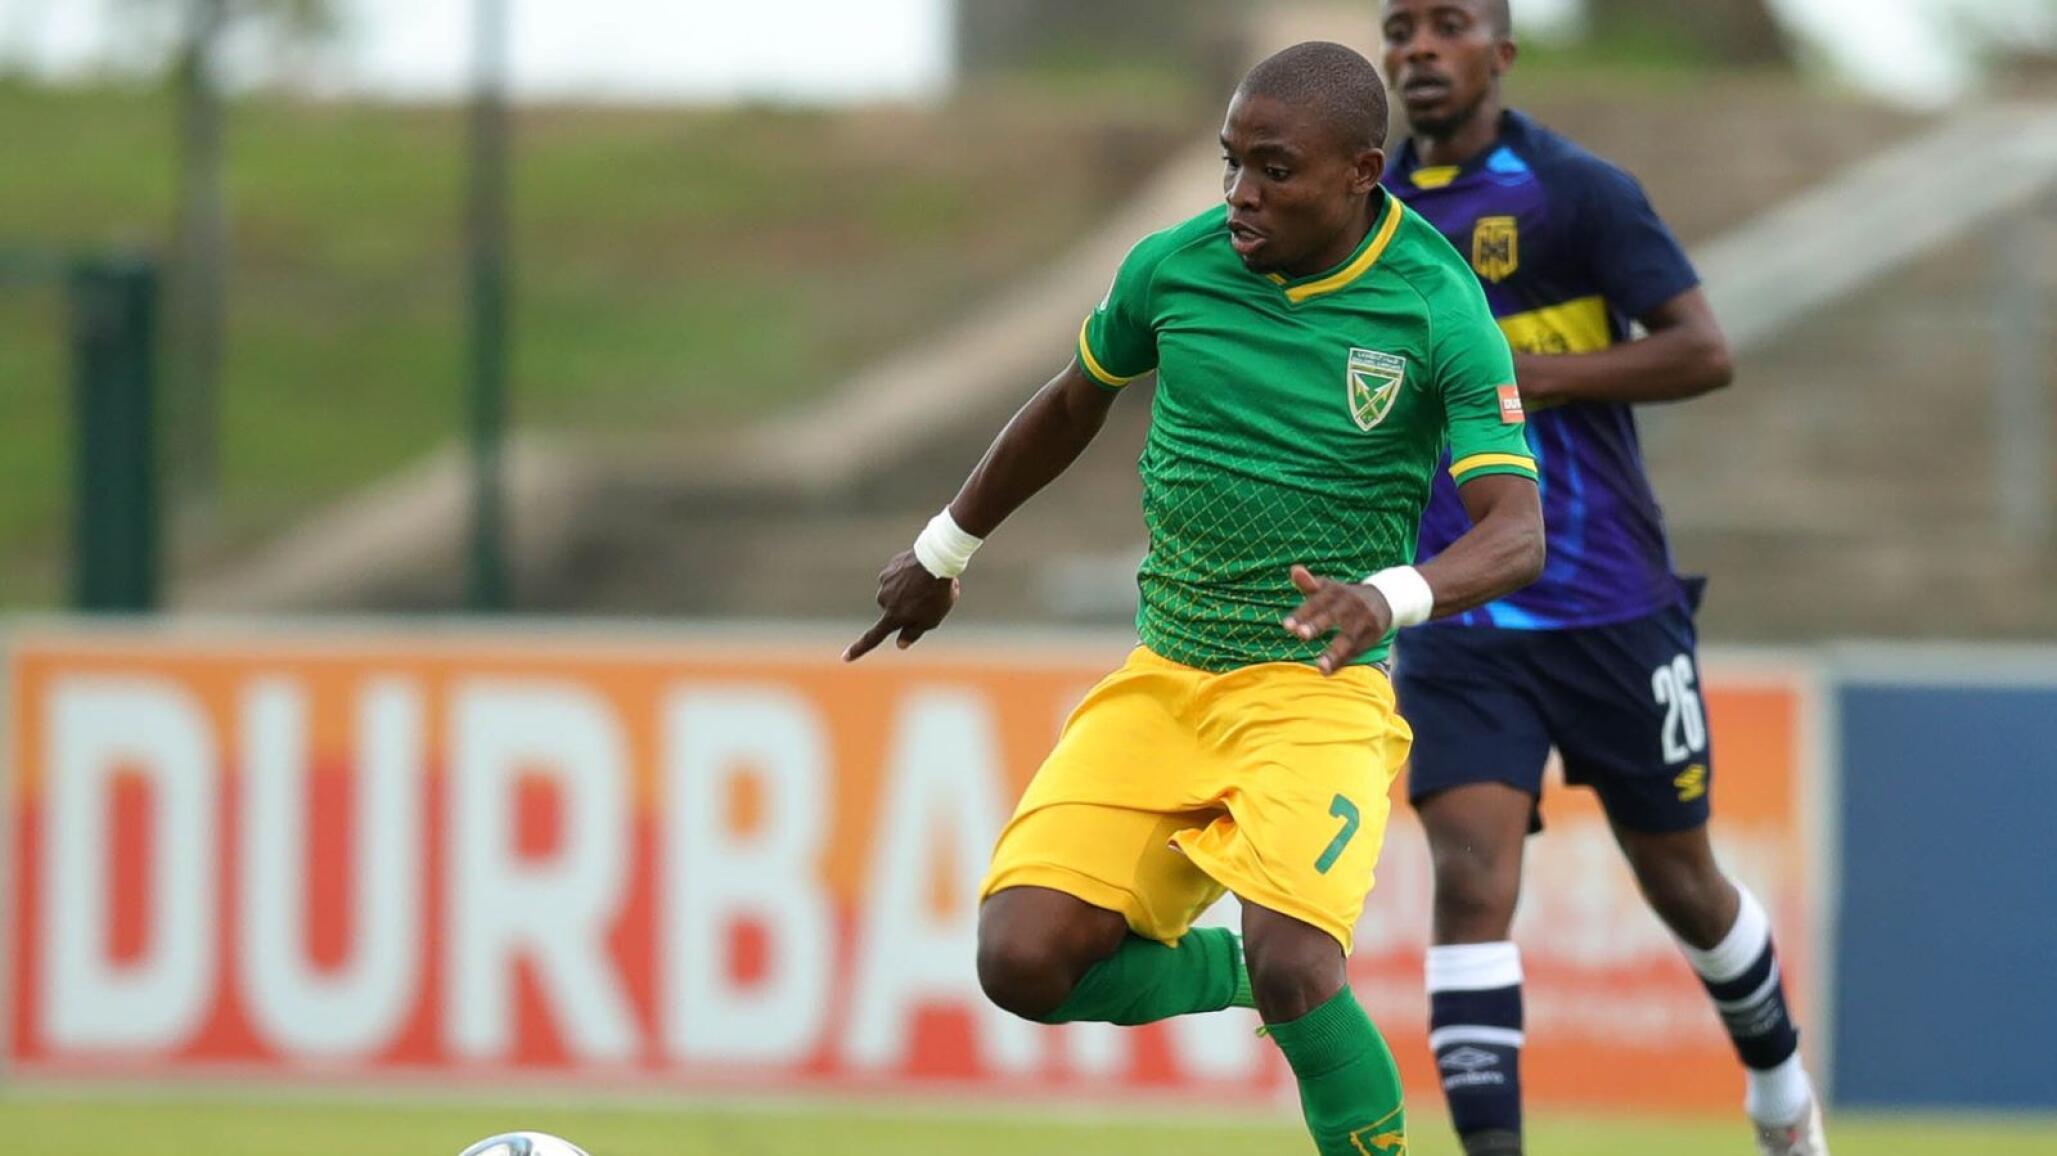 Golden Arrows player Lindokuhle Mtshali with the ball